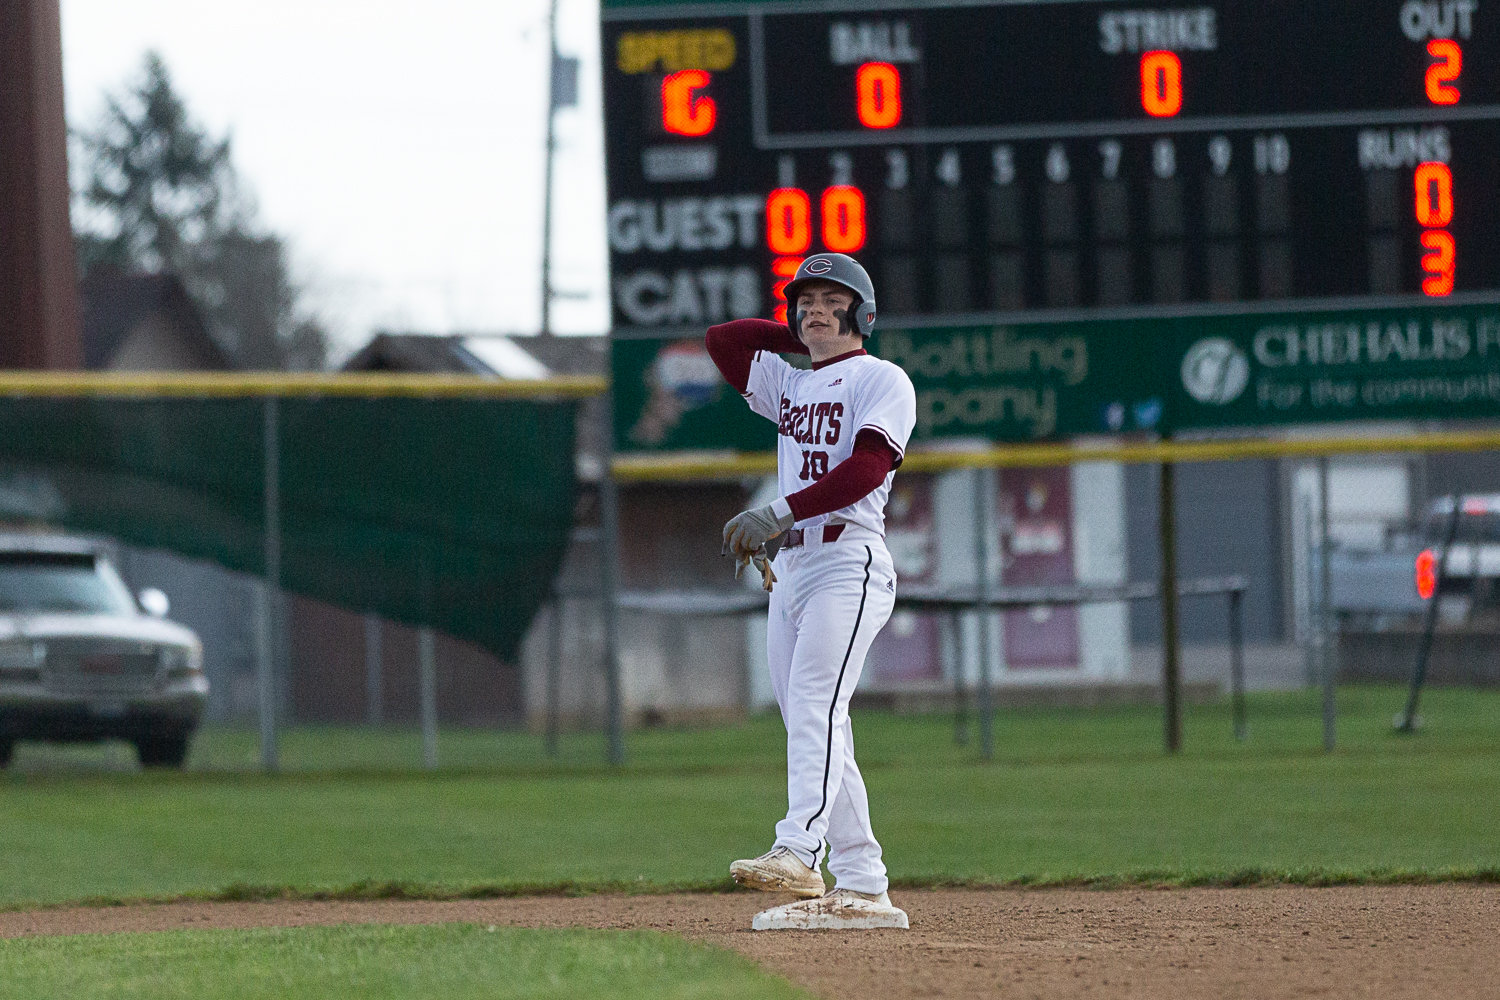 Lane Sahlin pulls an arrow out of his quiver after hitting a double during W.F. West's 4-1 win over Rochester on March 22.